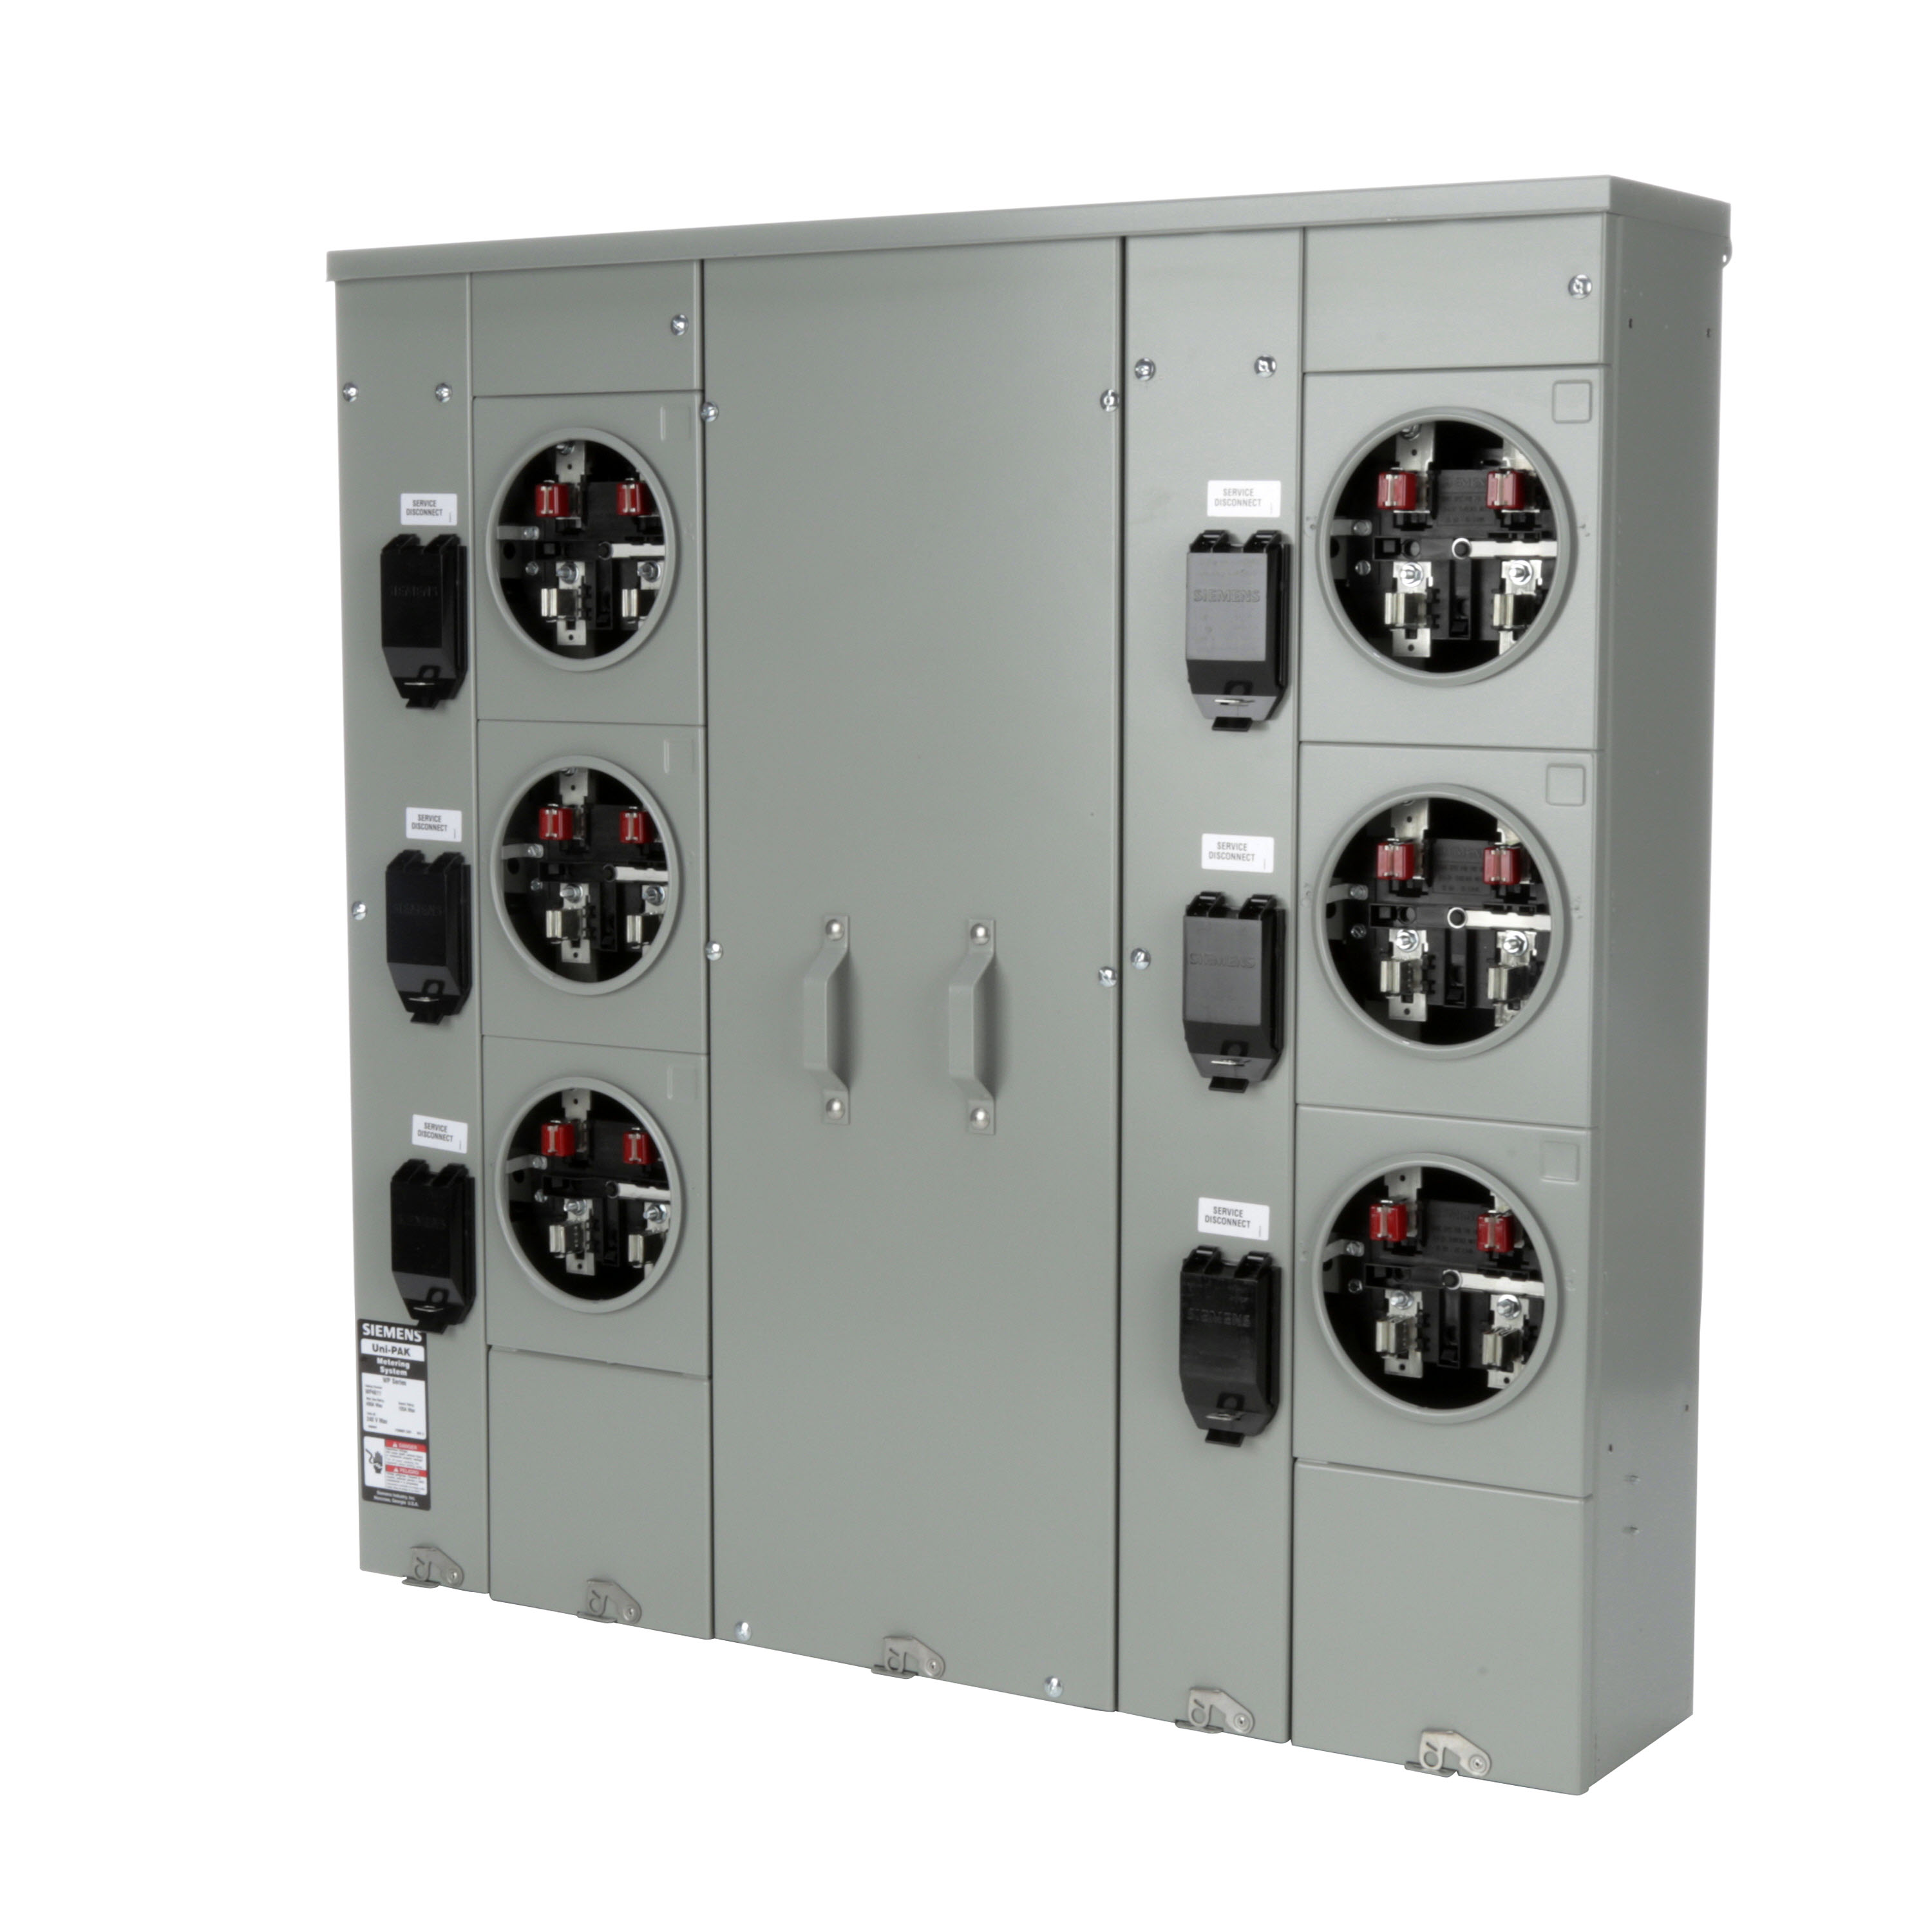 Siemens Low Voltage s Multi-Family Metering Line of PAK Metering Standard 125A as part of the PAK Metering Standard 125A Group. 9.000 x 39.190 x 39.630 Type UNI-PAK for garden-style applications. Meets stds UL-50,67,414. Rated 120/240V (400A). Insulated. RING enclosure with wall mounting. Special features no bypass